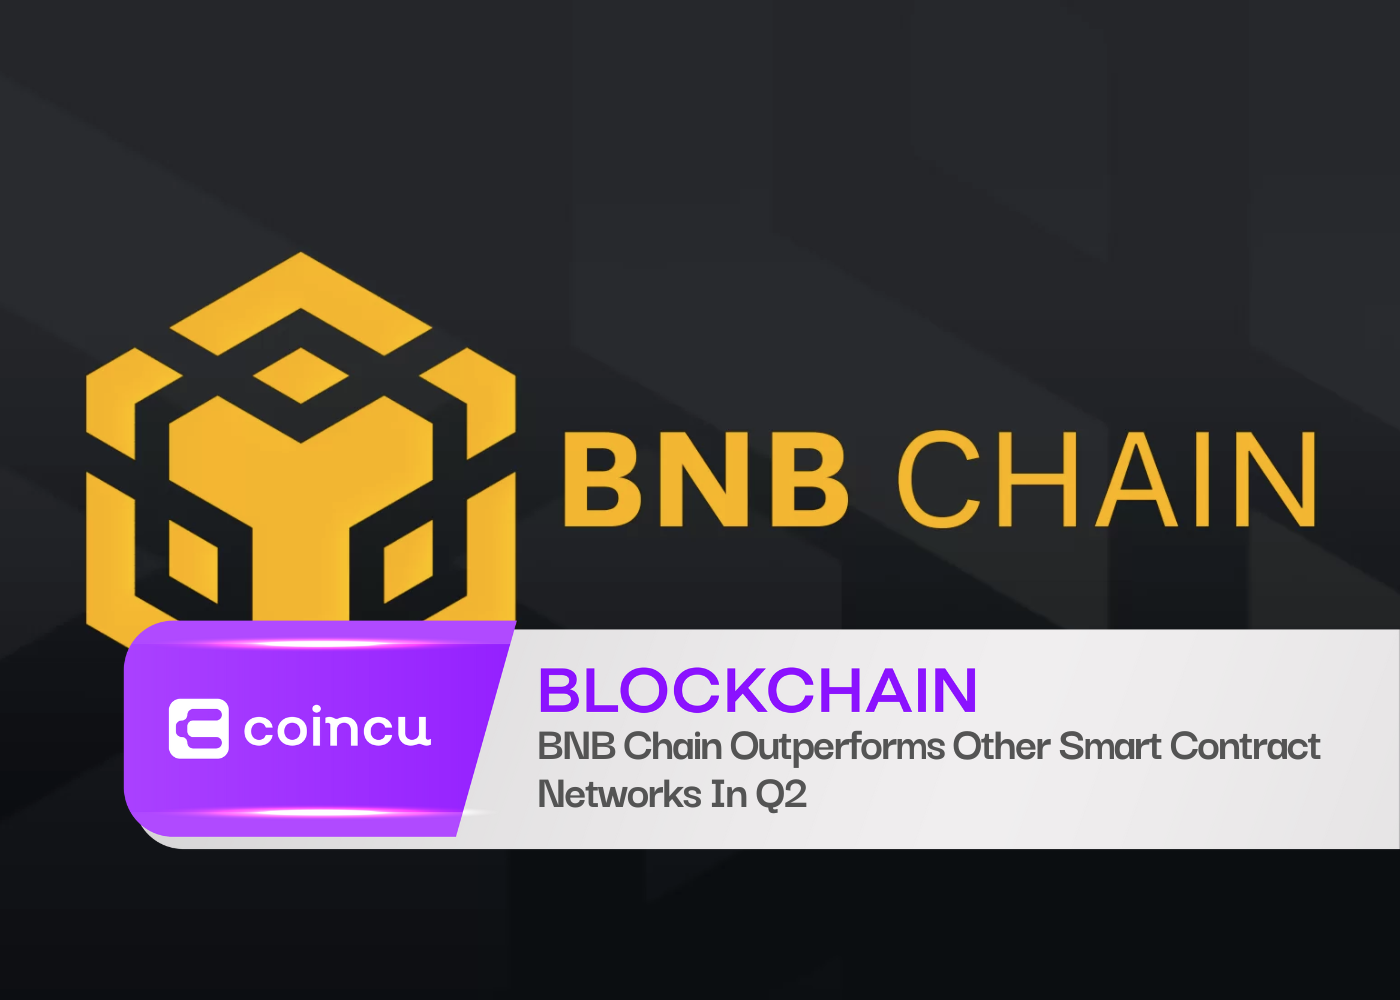 BNB Chain Outperforms Other Smart Contract Networks In Q2